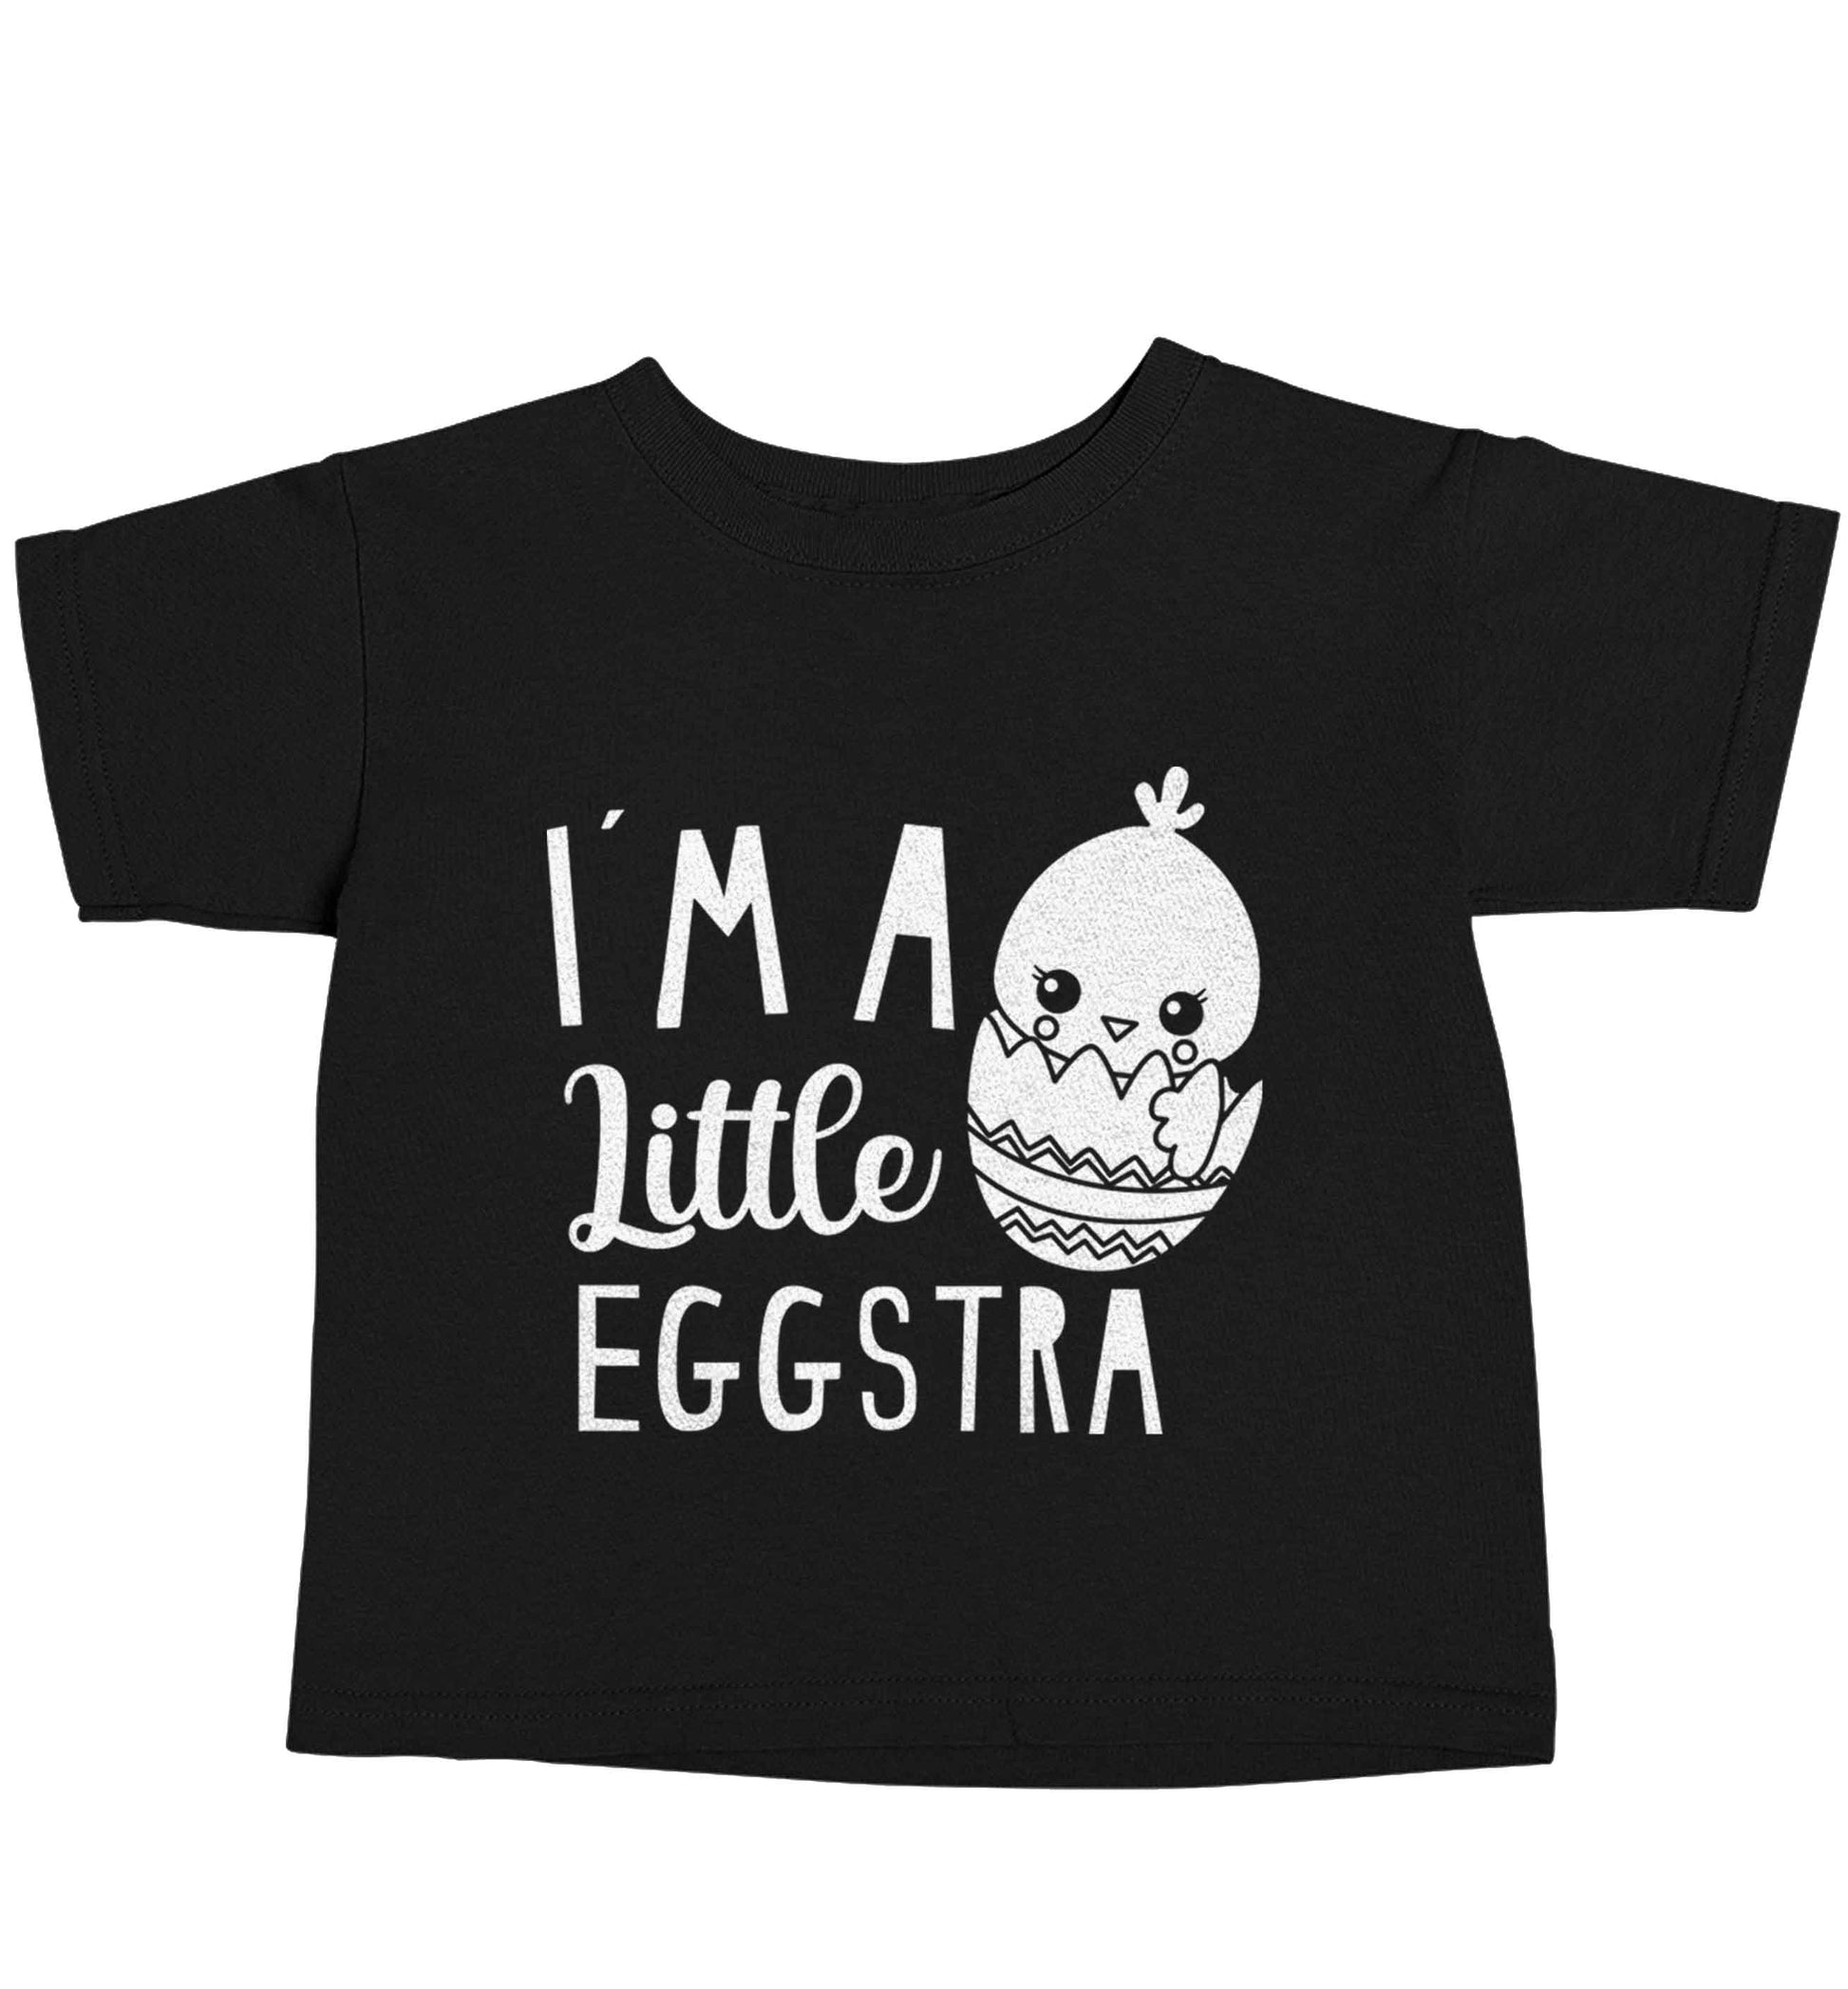 I'm a little eggstra Black baby toddler Tshirt 2 years